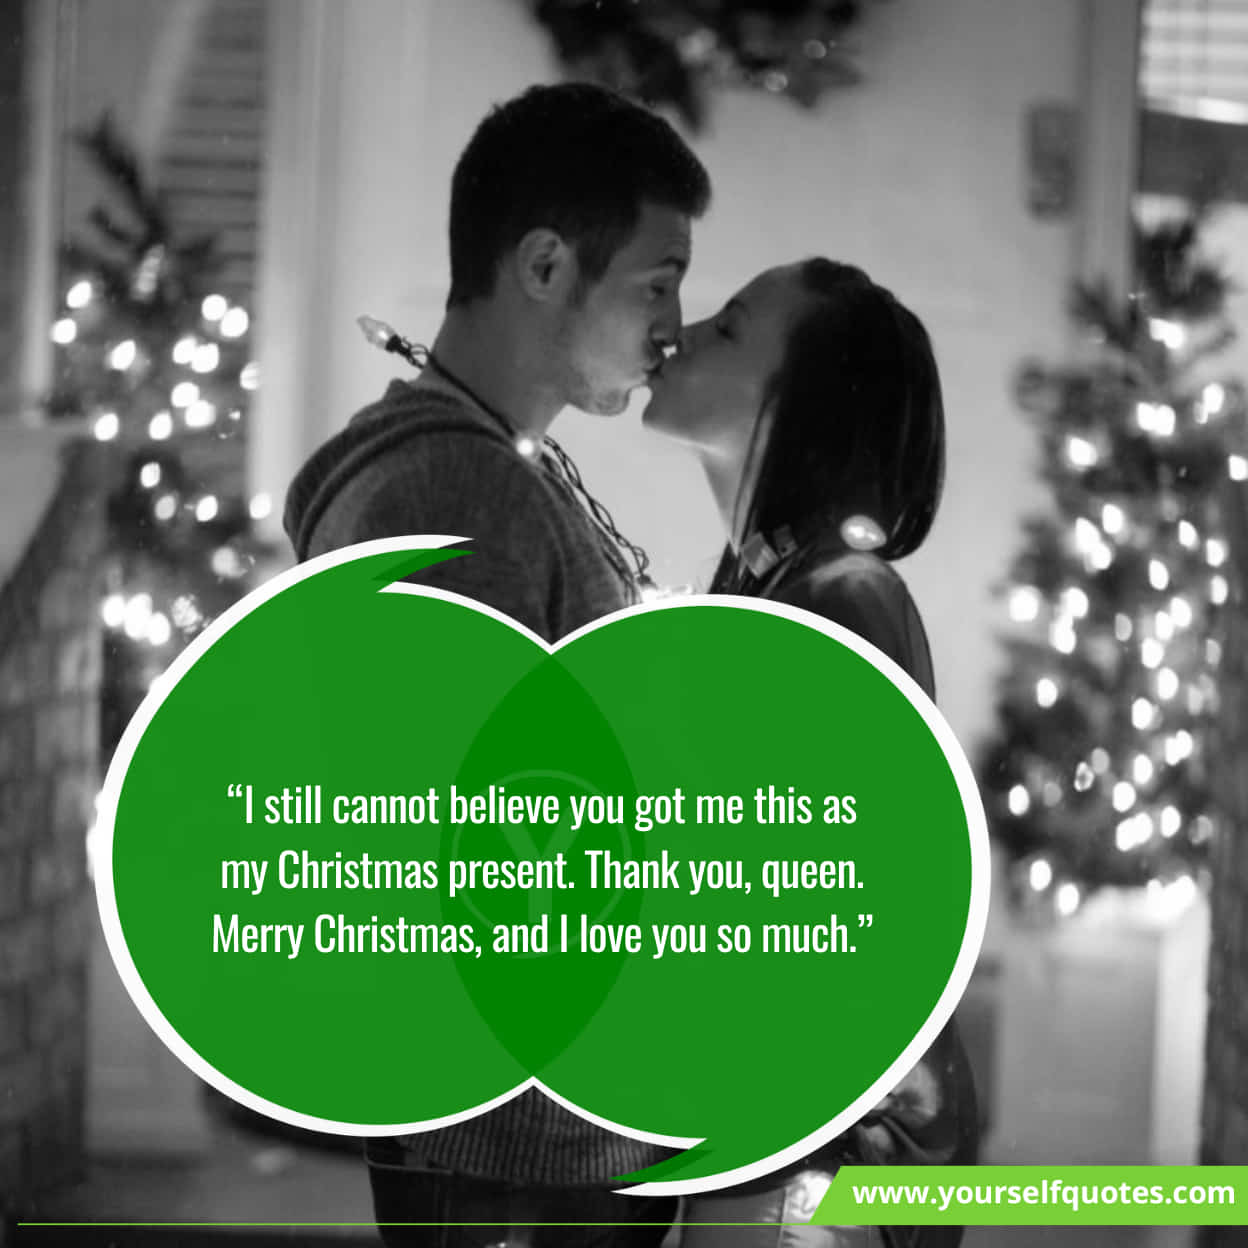 118 Merry Christmas Wishes For Wife To Feel Her Special